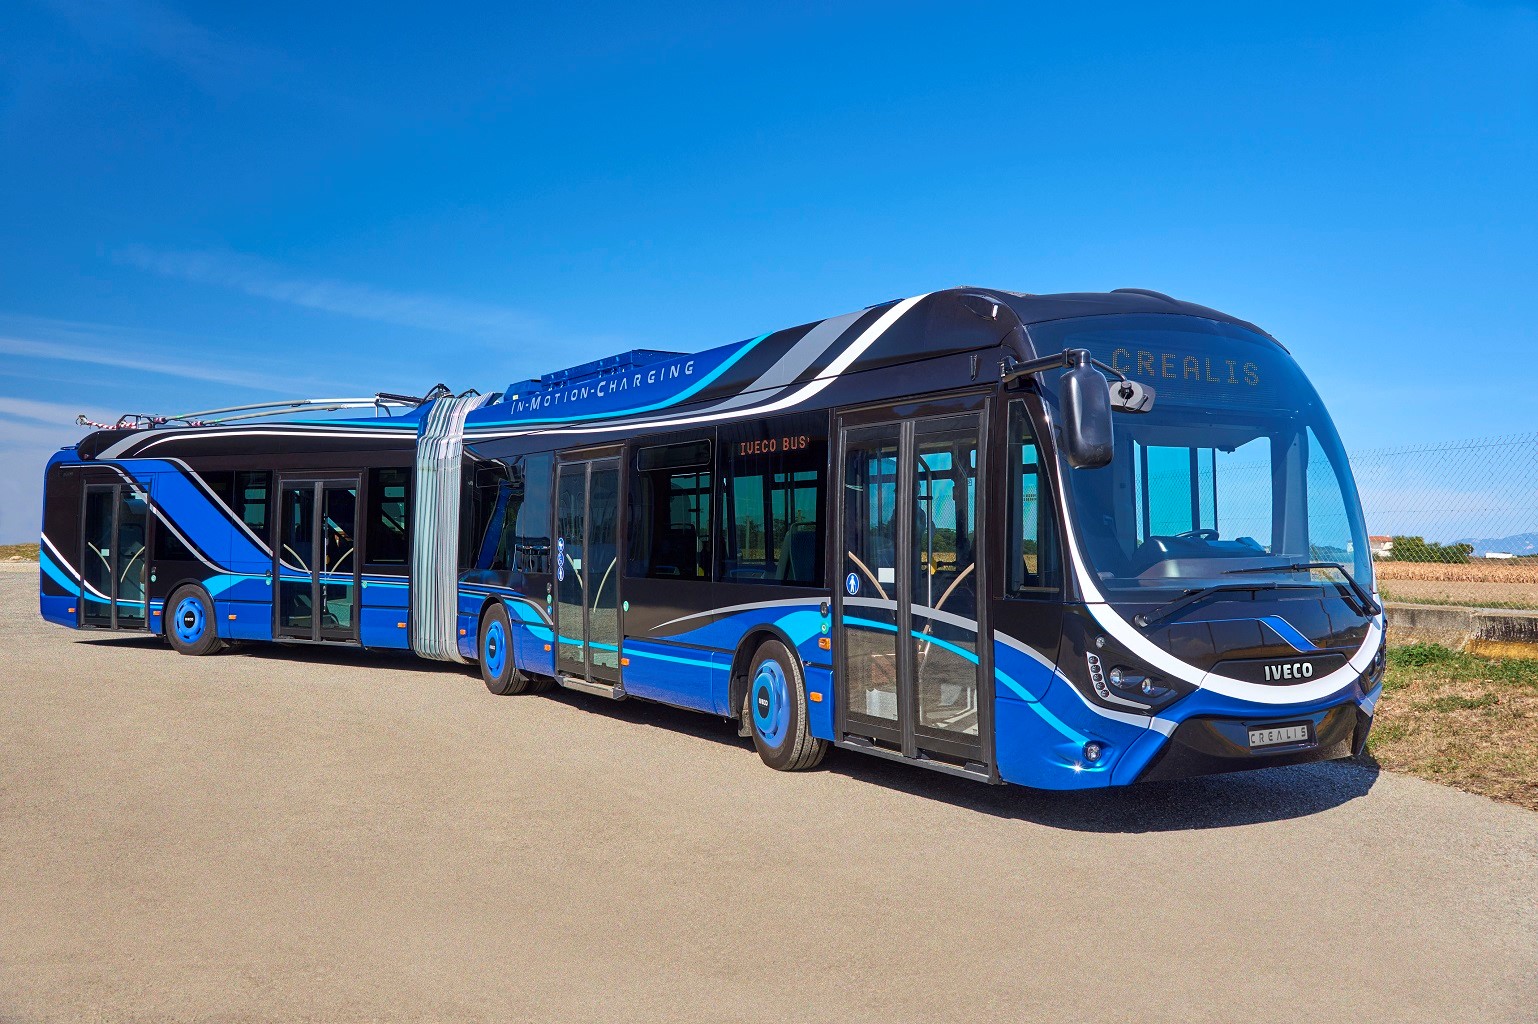 The IVECO CREALIS In-Motion-Charging, IAA's Sustainable Bus of the Year 2018